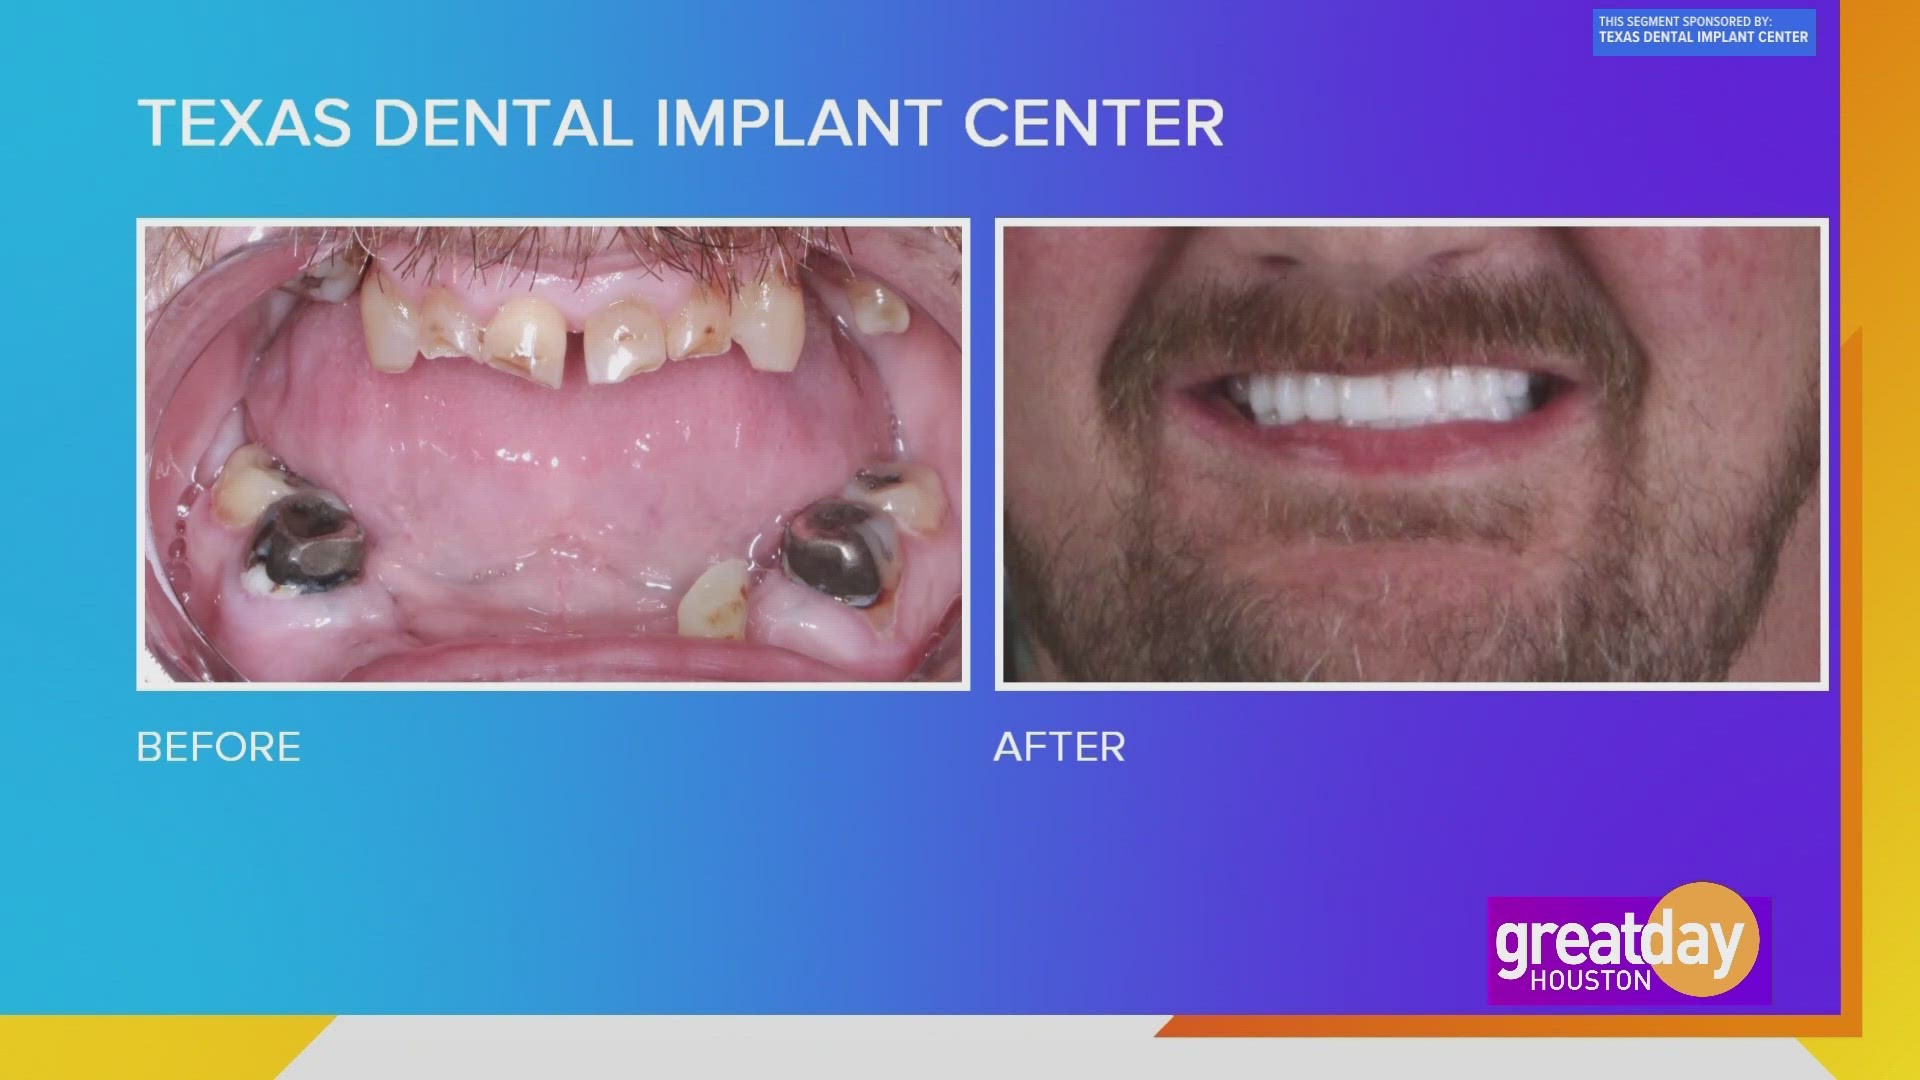 Many people experience missing or broken teeth as they age. A trip to Texas Dental Implant Center can help transform your smile... for good!